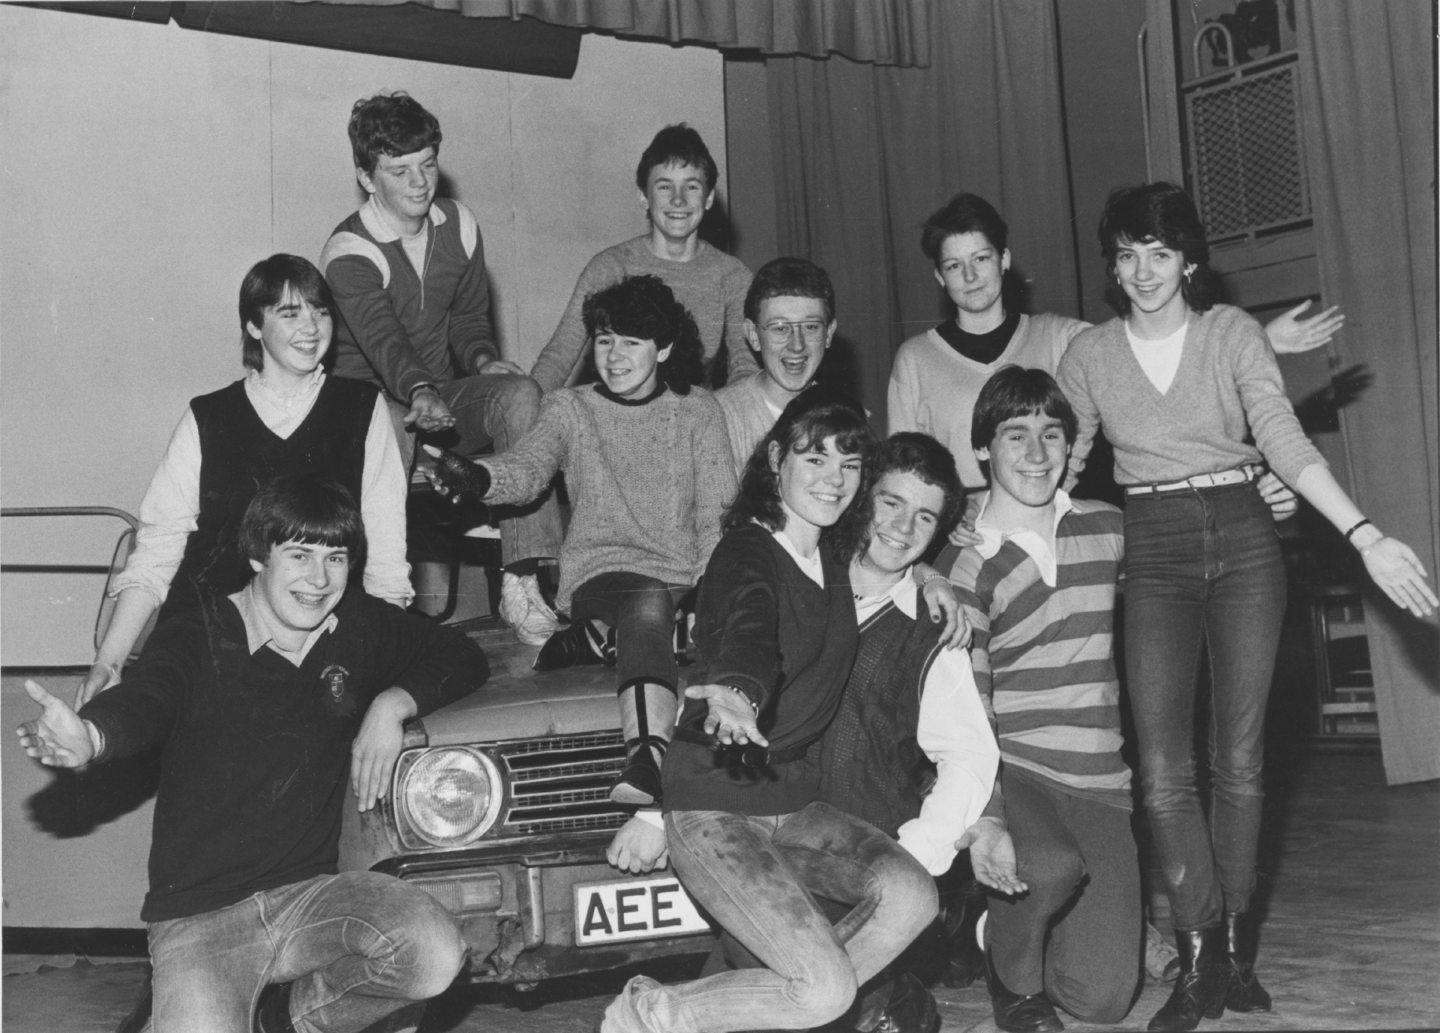 Inverurie Academy cast of their production of Grease posing for photos around the car